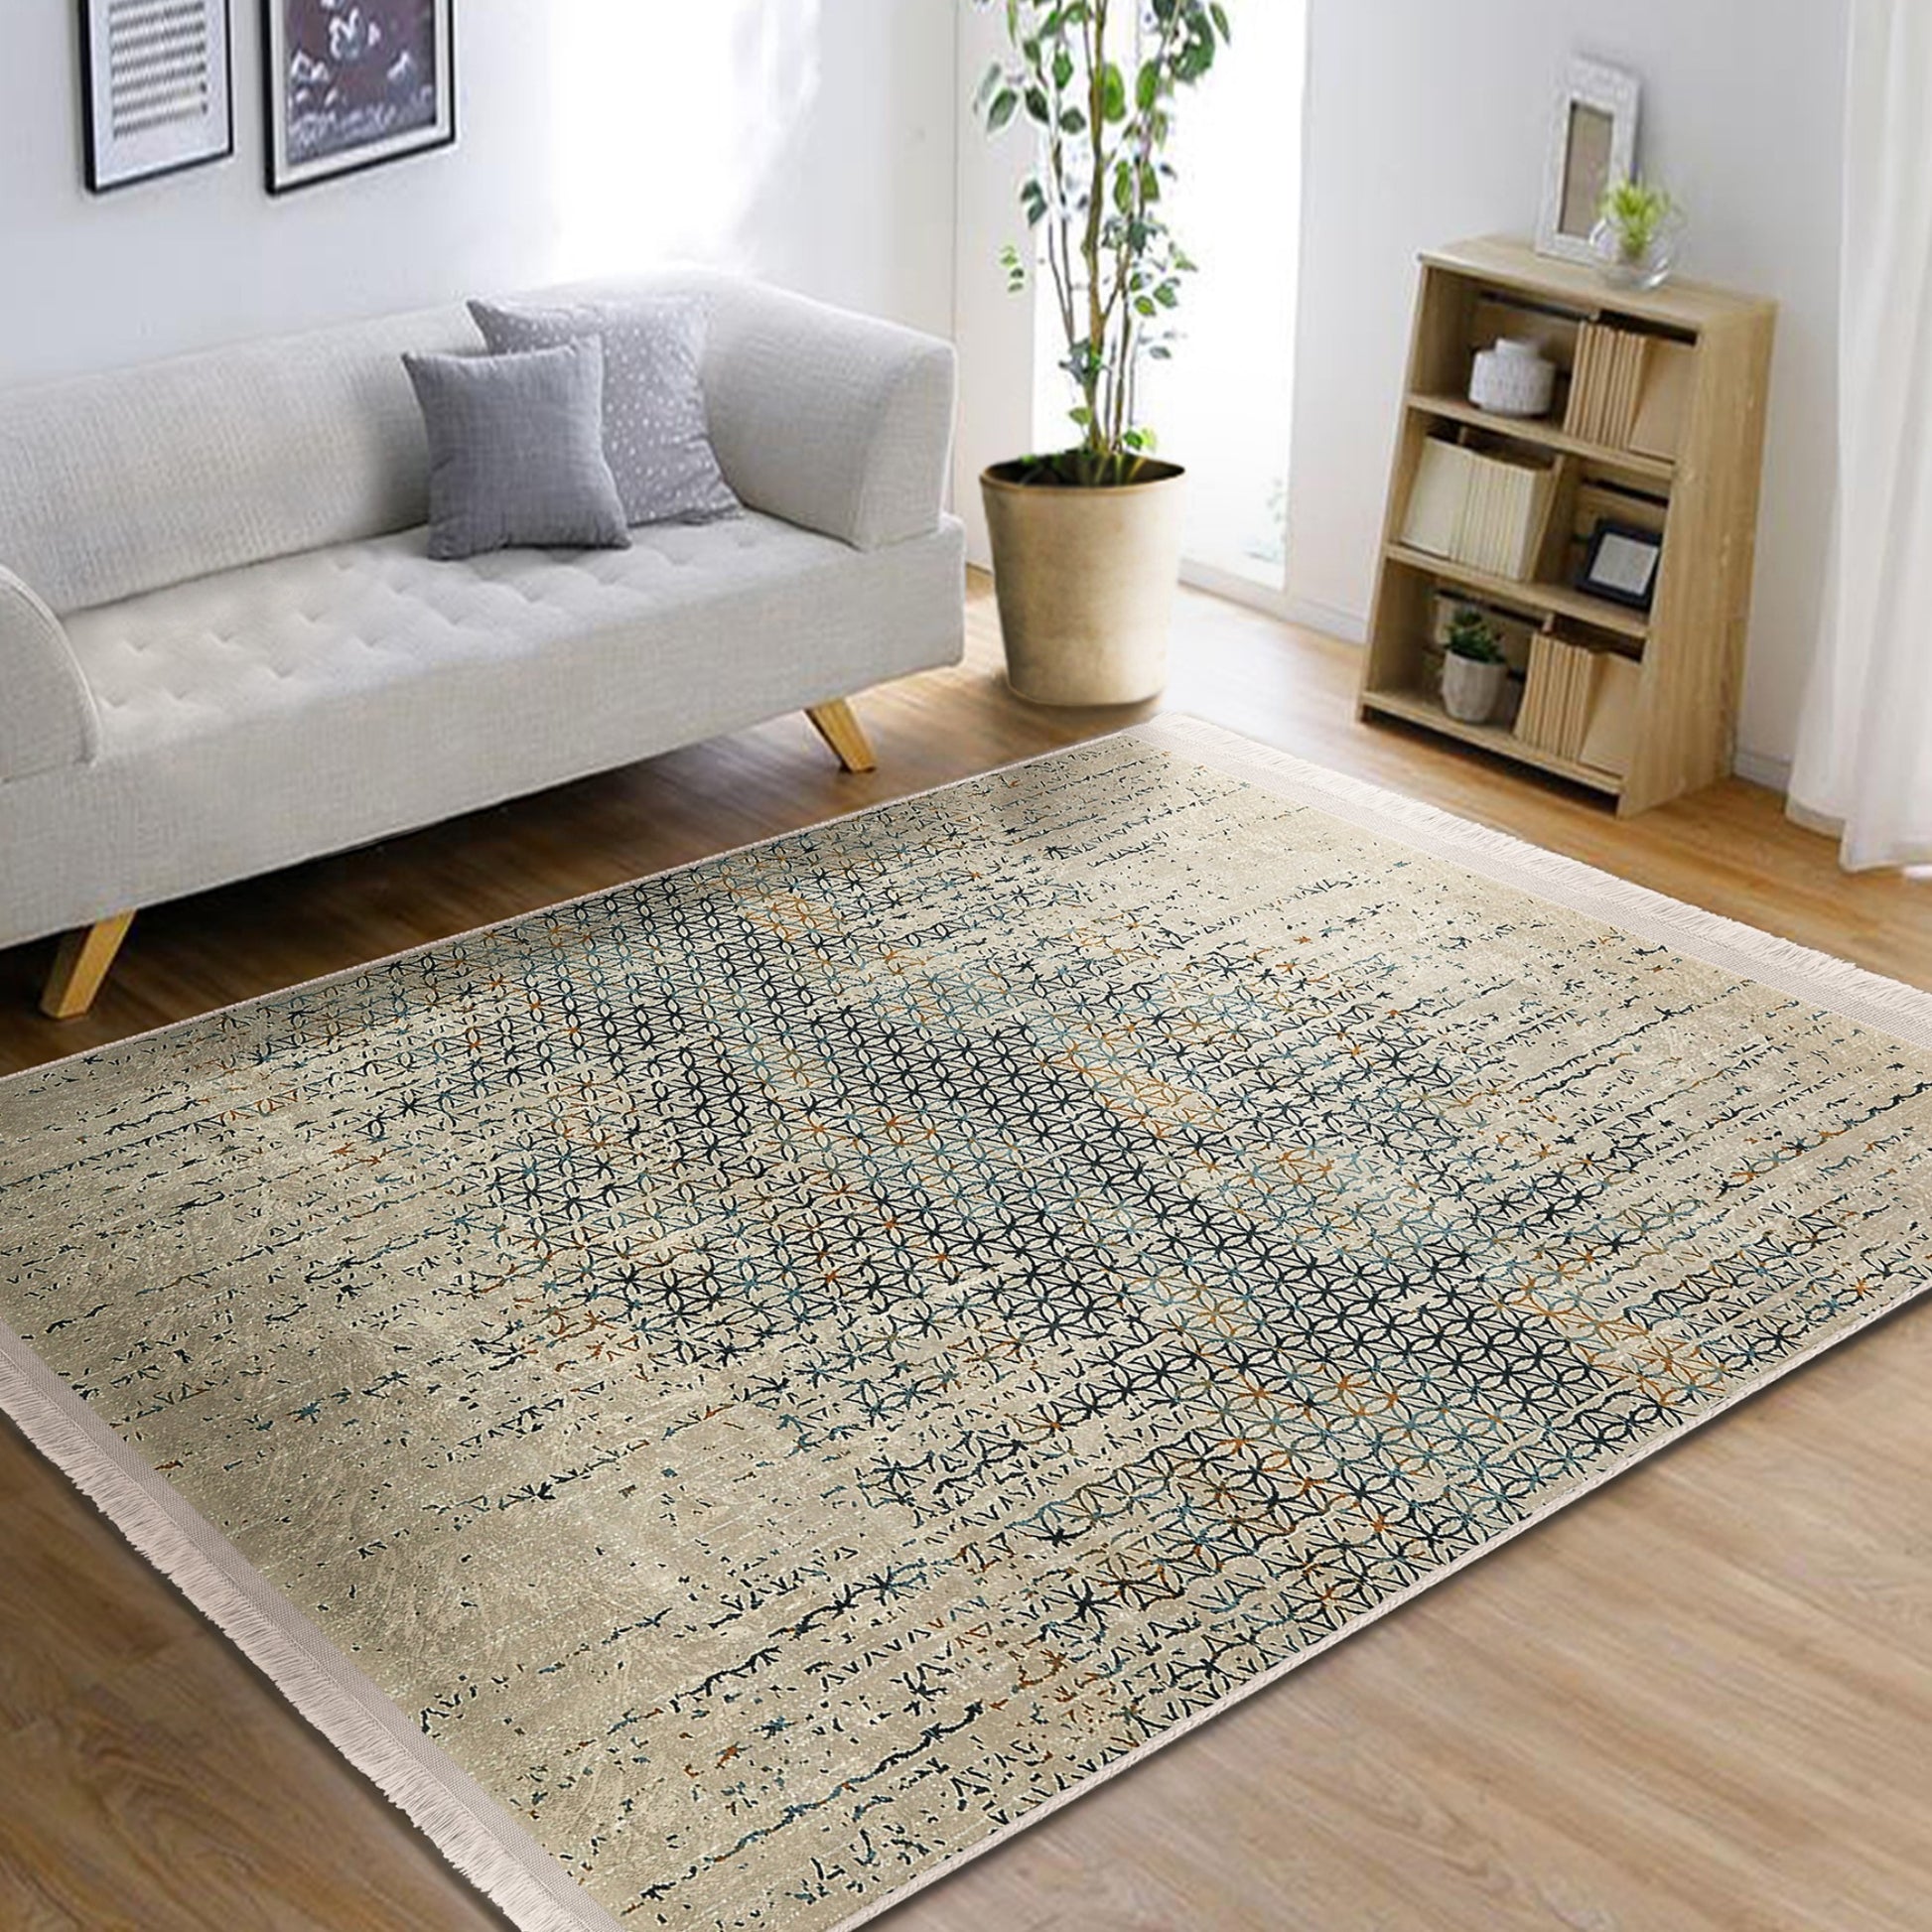 Eco-Friendly Jute Rug for a Stylish and Sustainable Living Space